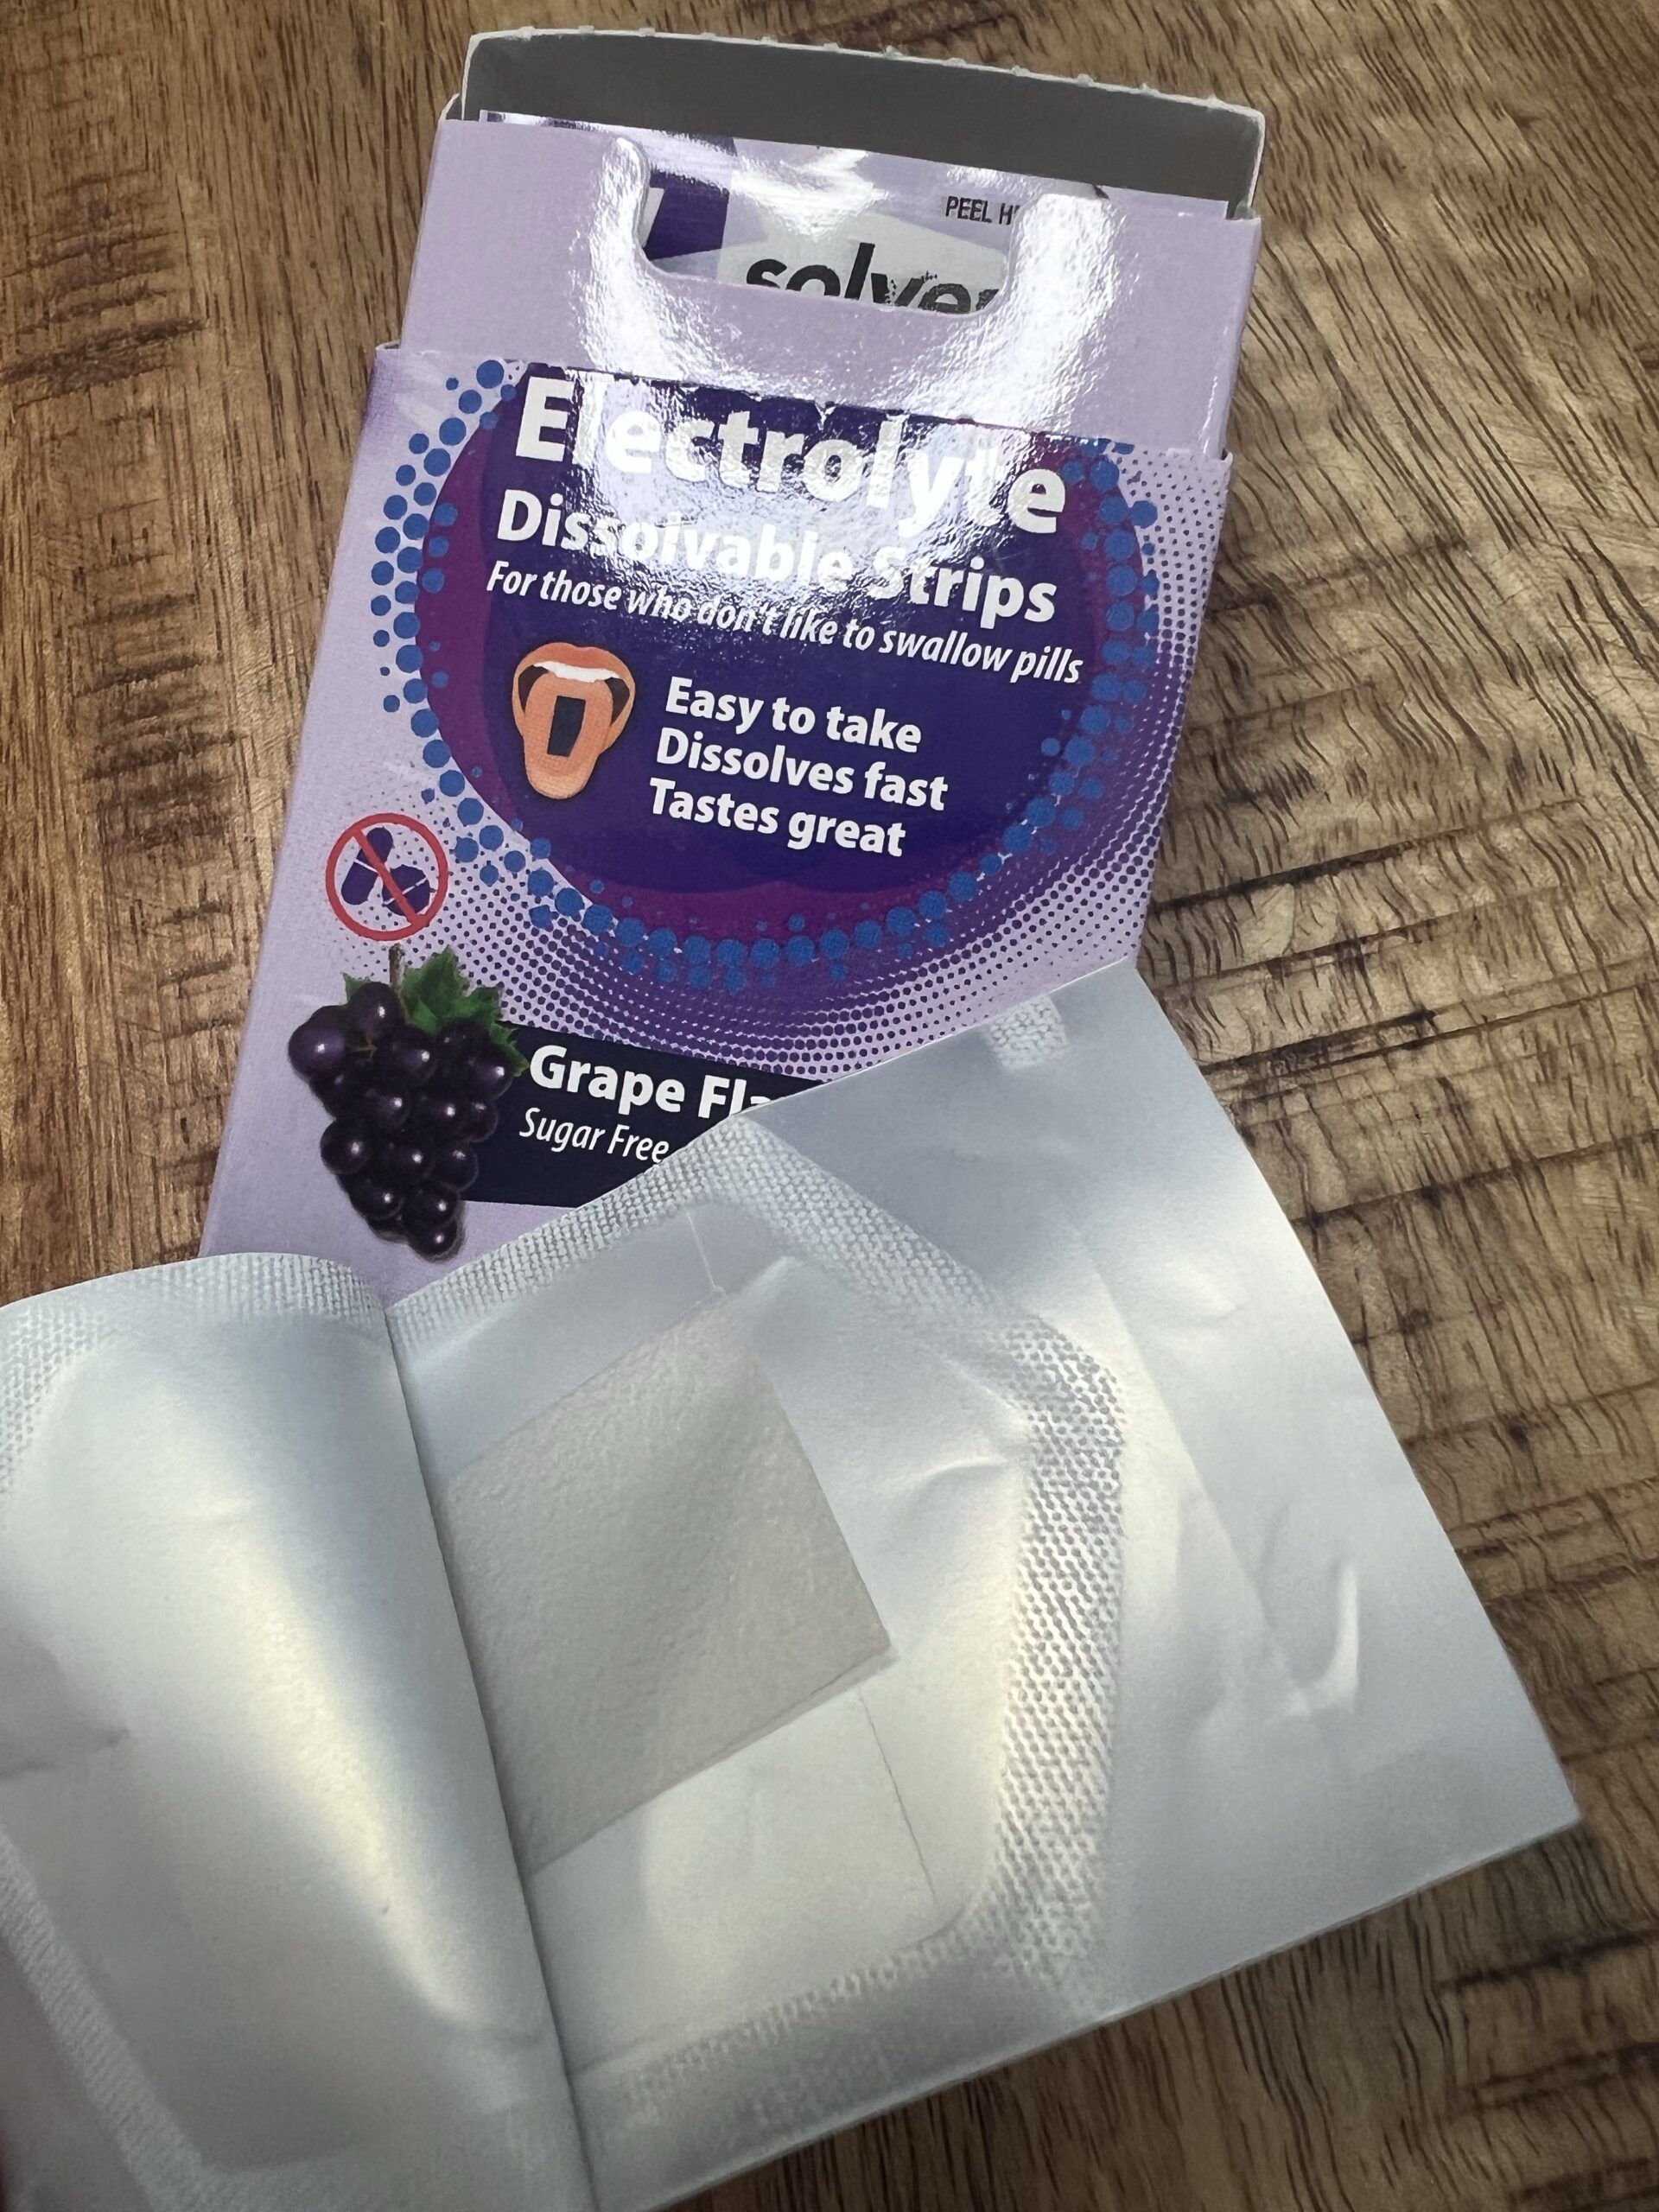 A New Way to Hydrate: My Review of Solves Electrolyte Dissolvable Strips and Taste Test